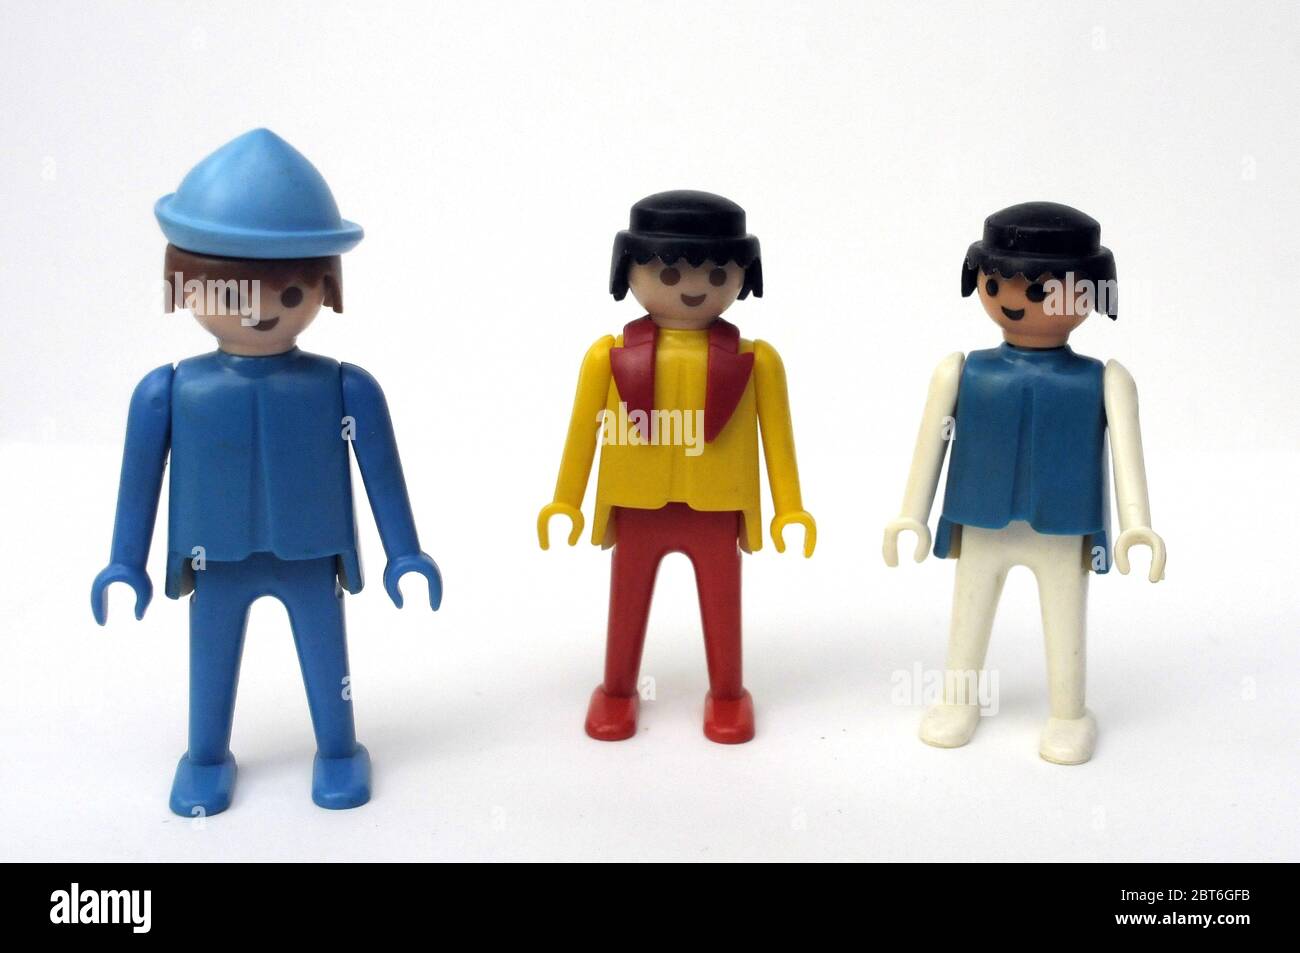 Playmobil High Resolution Stock Photography and Images - Alamy